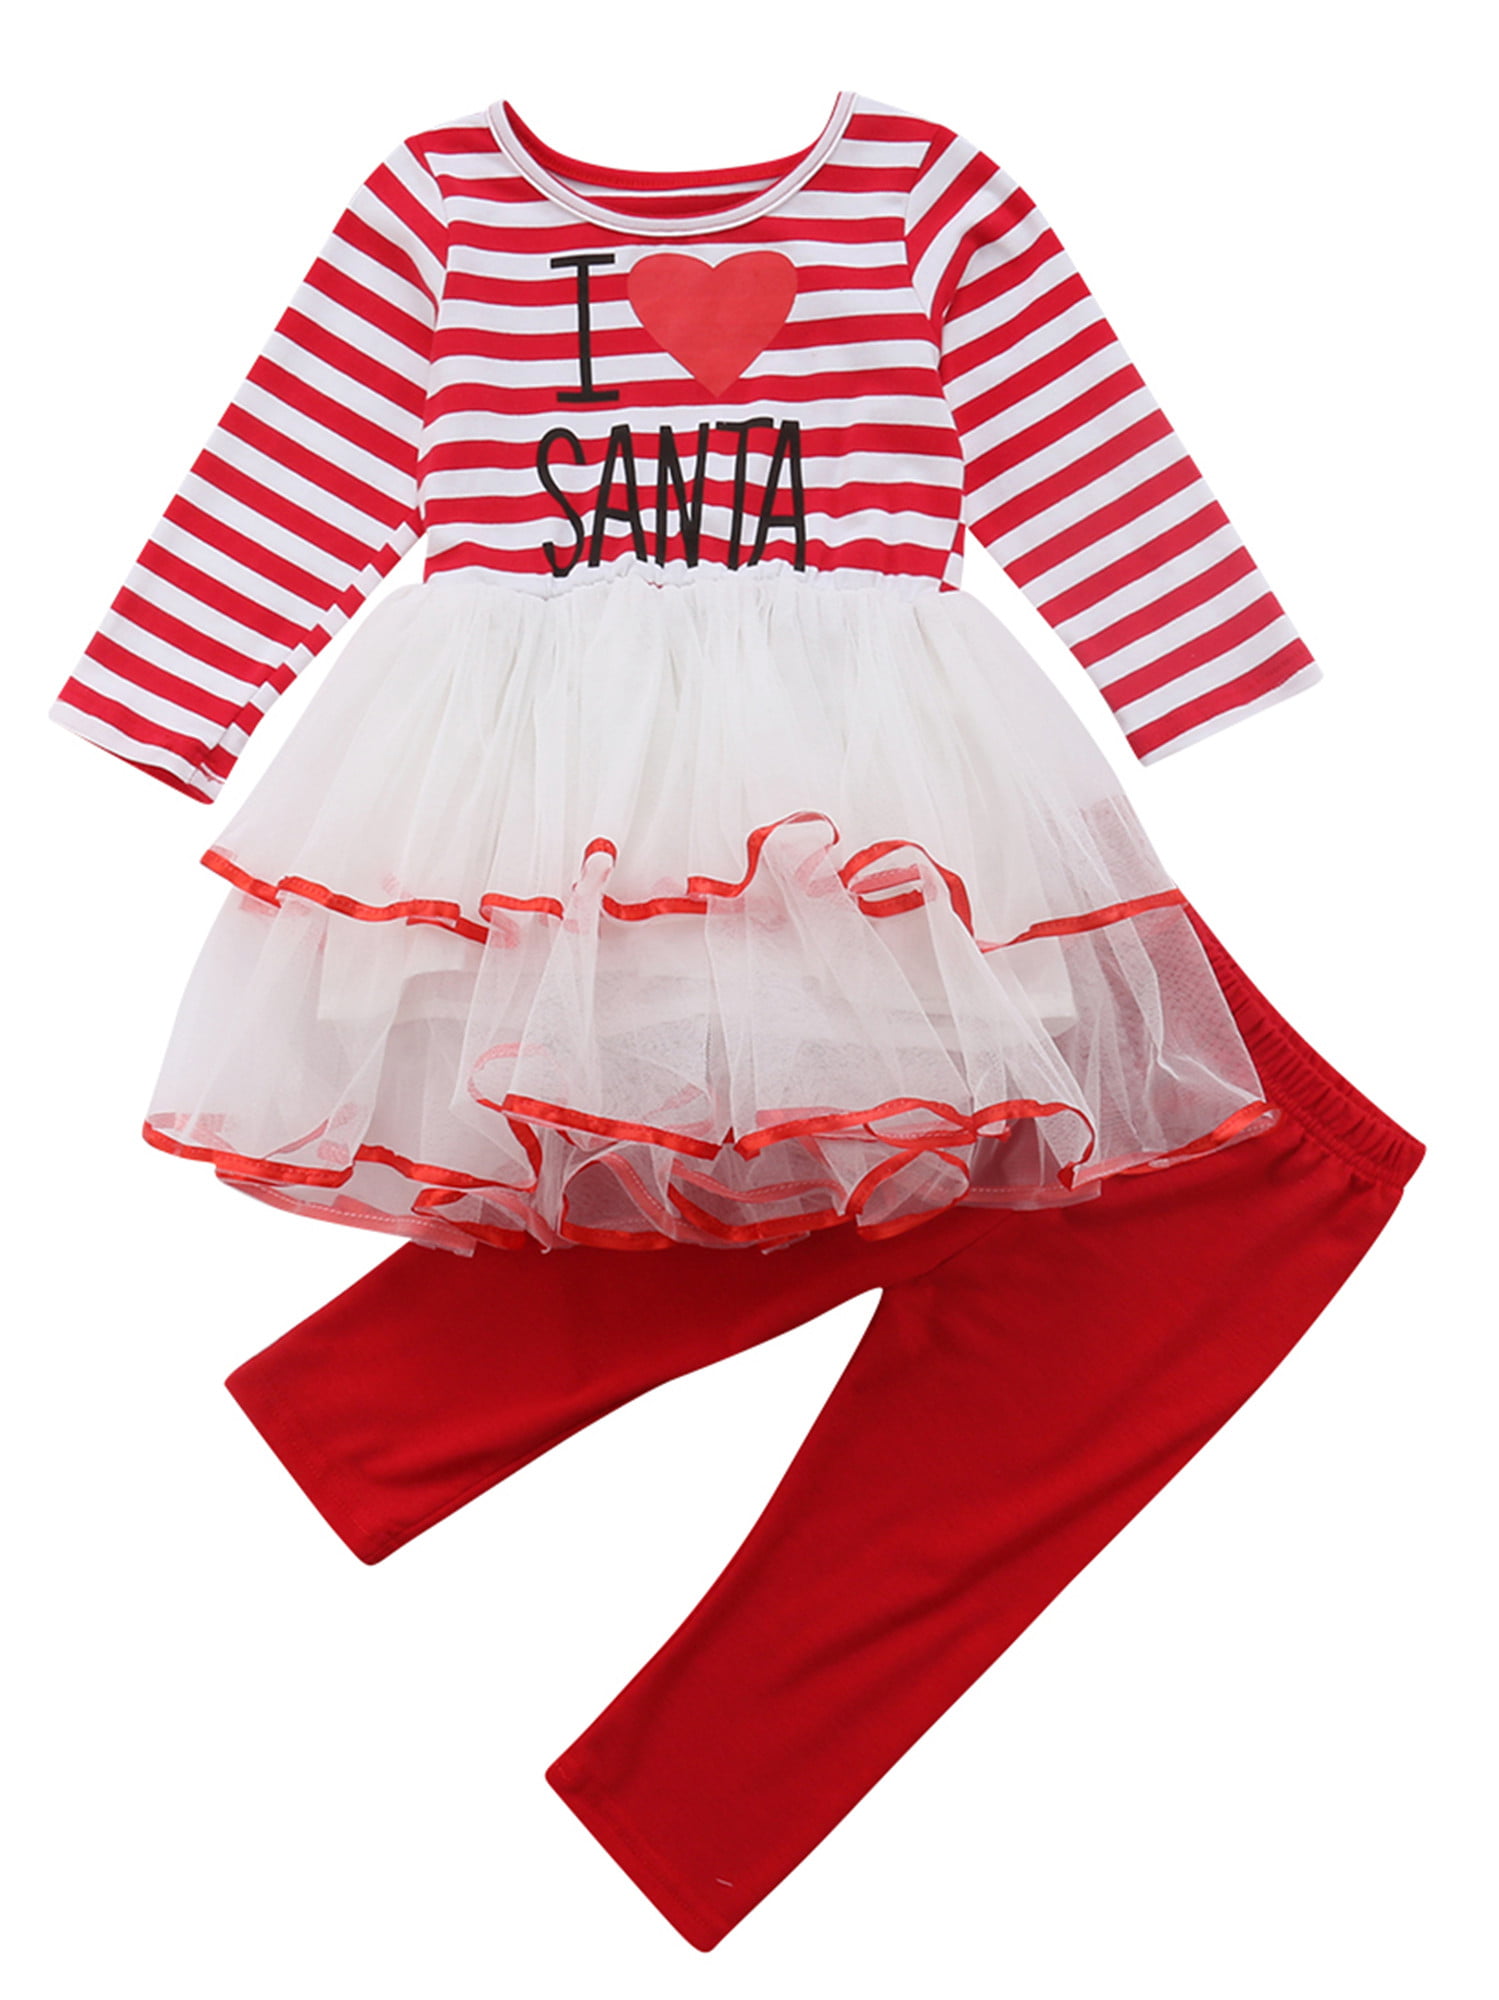 Christmas Outfits for Baby Girls Tutu Dress Tshirt with Striped/Red Plaid Pant Clothing Set 